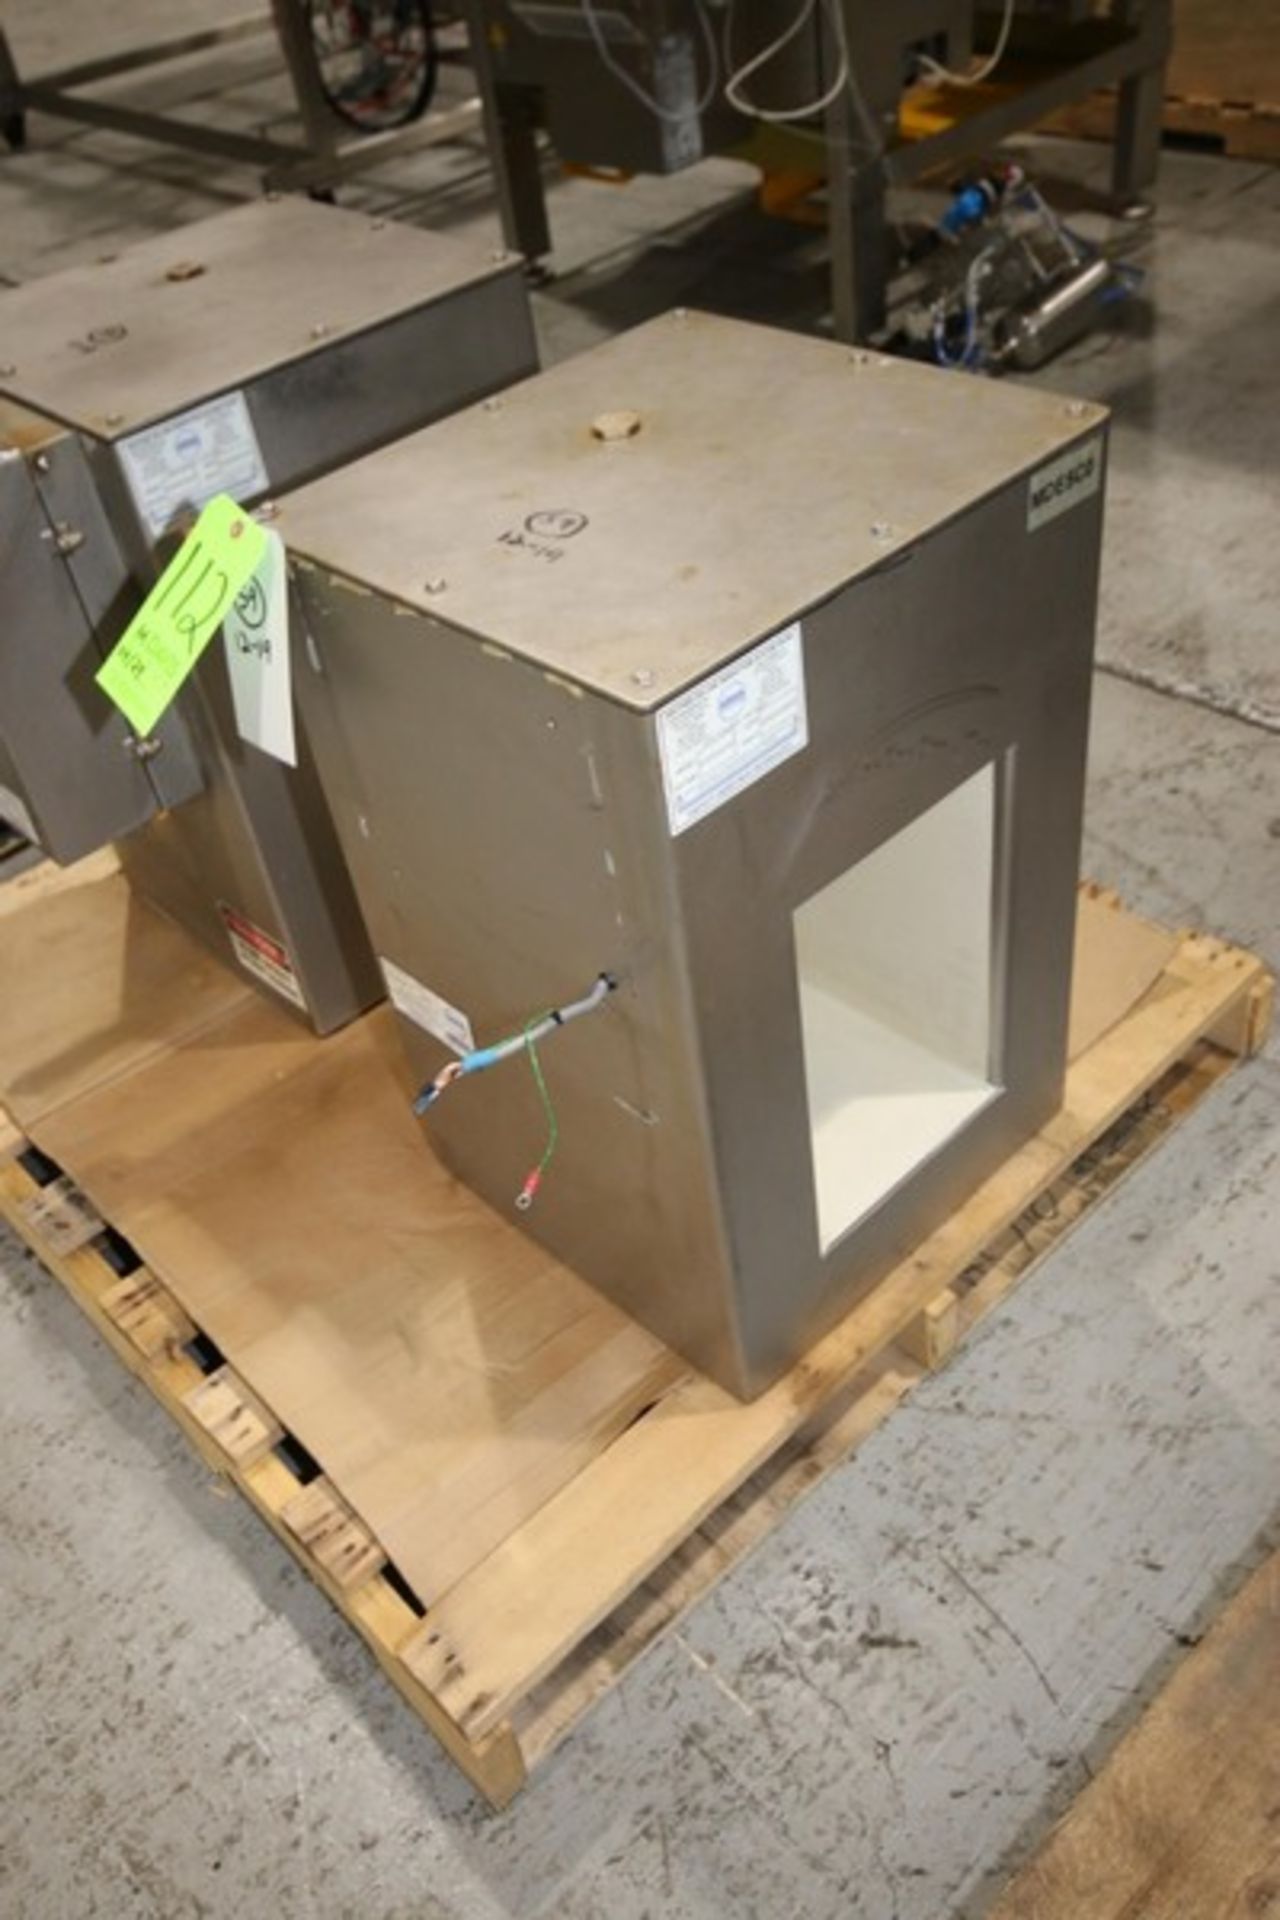 Loma IQ2 S/S Flo-Thru Metal Detector, S/N 38565B, with Aprox. 9" W x 16" D x 13-1/2" H Product - Image 2 of 3